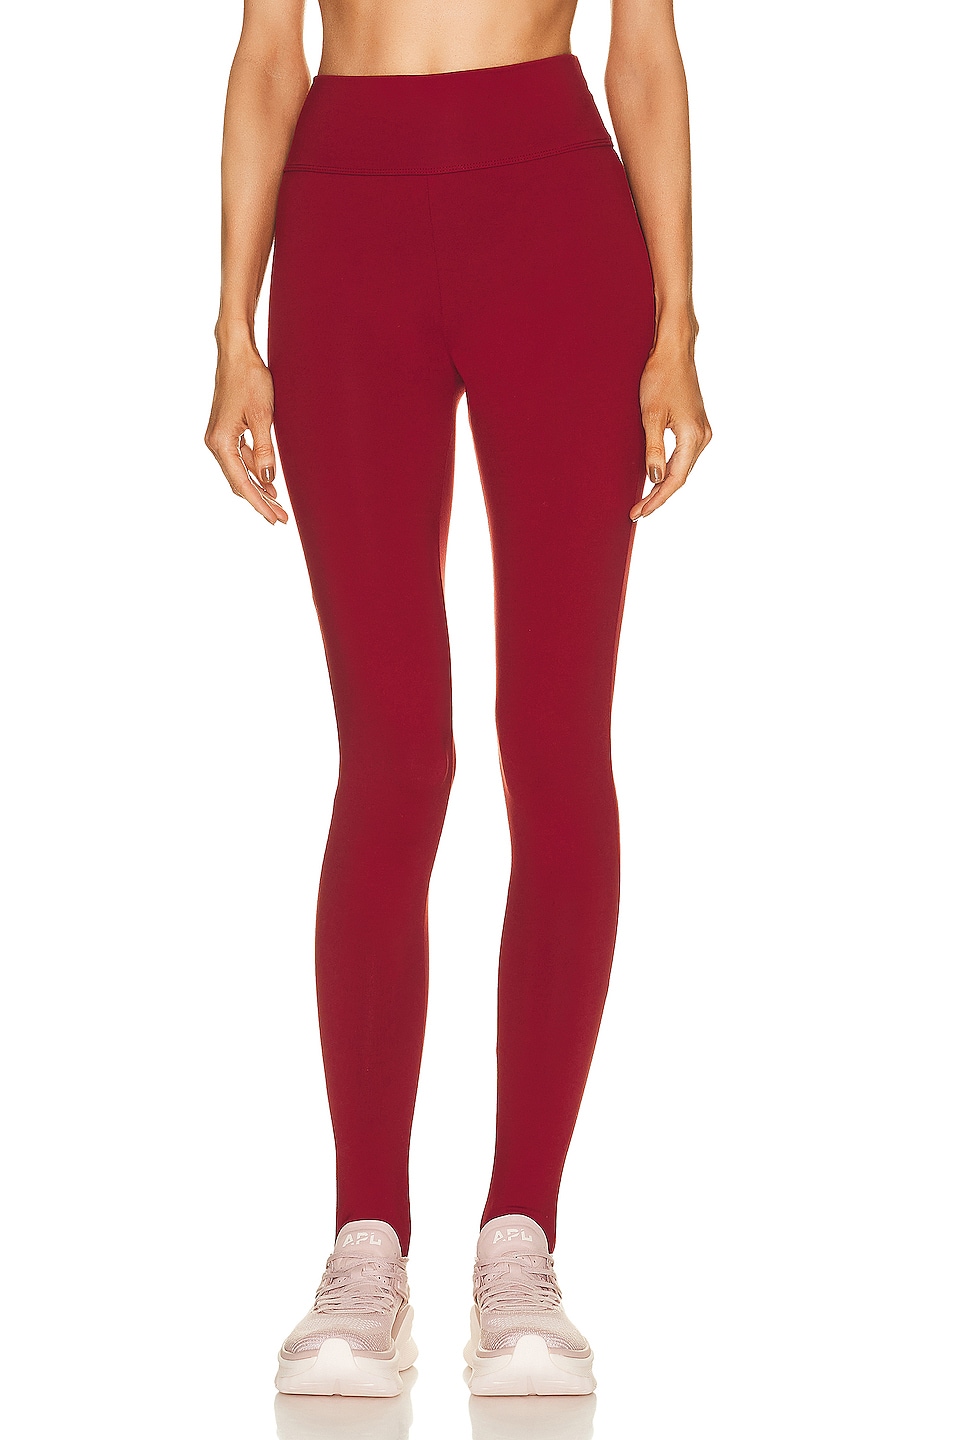 Image 1 of Live The Process Ballet Legging in Chili Flake